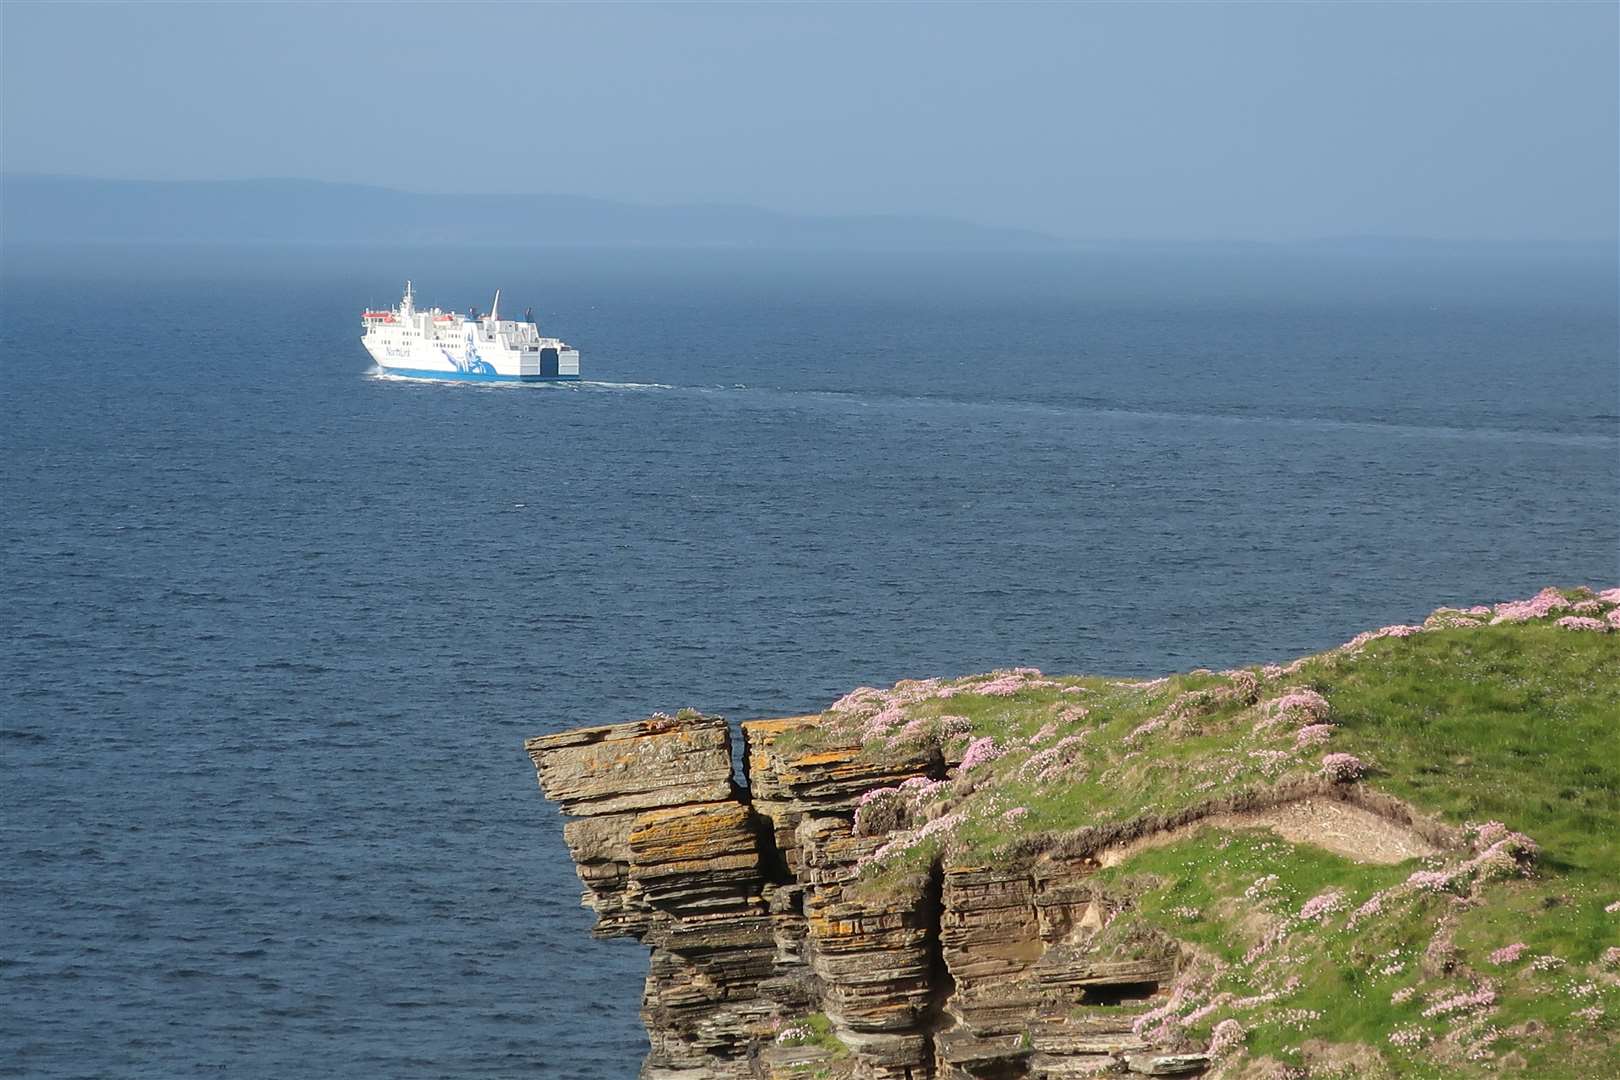 The NorthLink ferry heads out of Thurso Bay towards Orkney, as seen from Holborn Head.